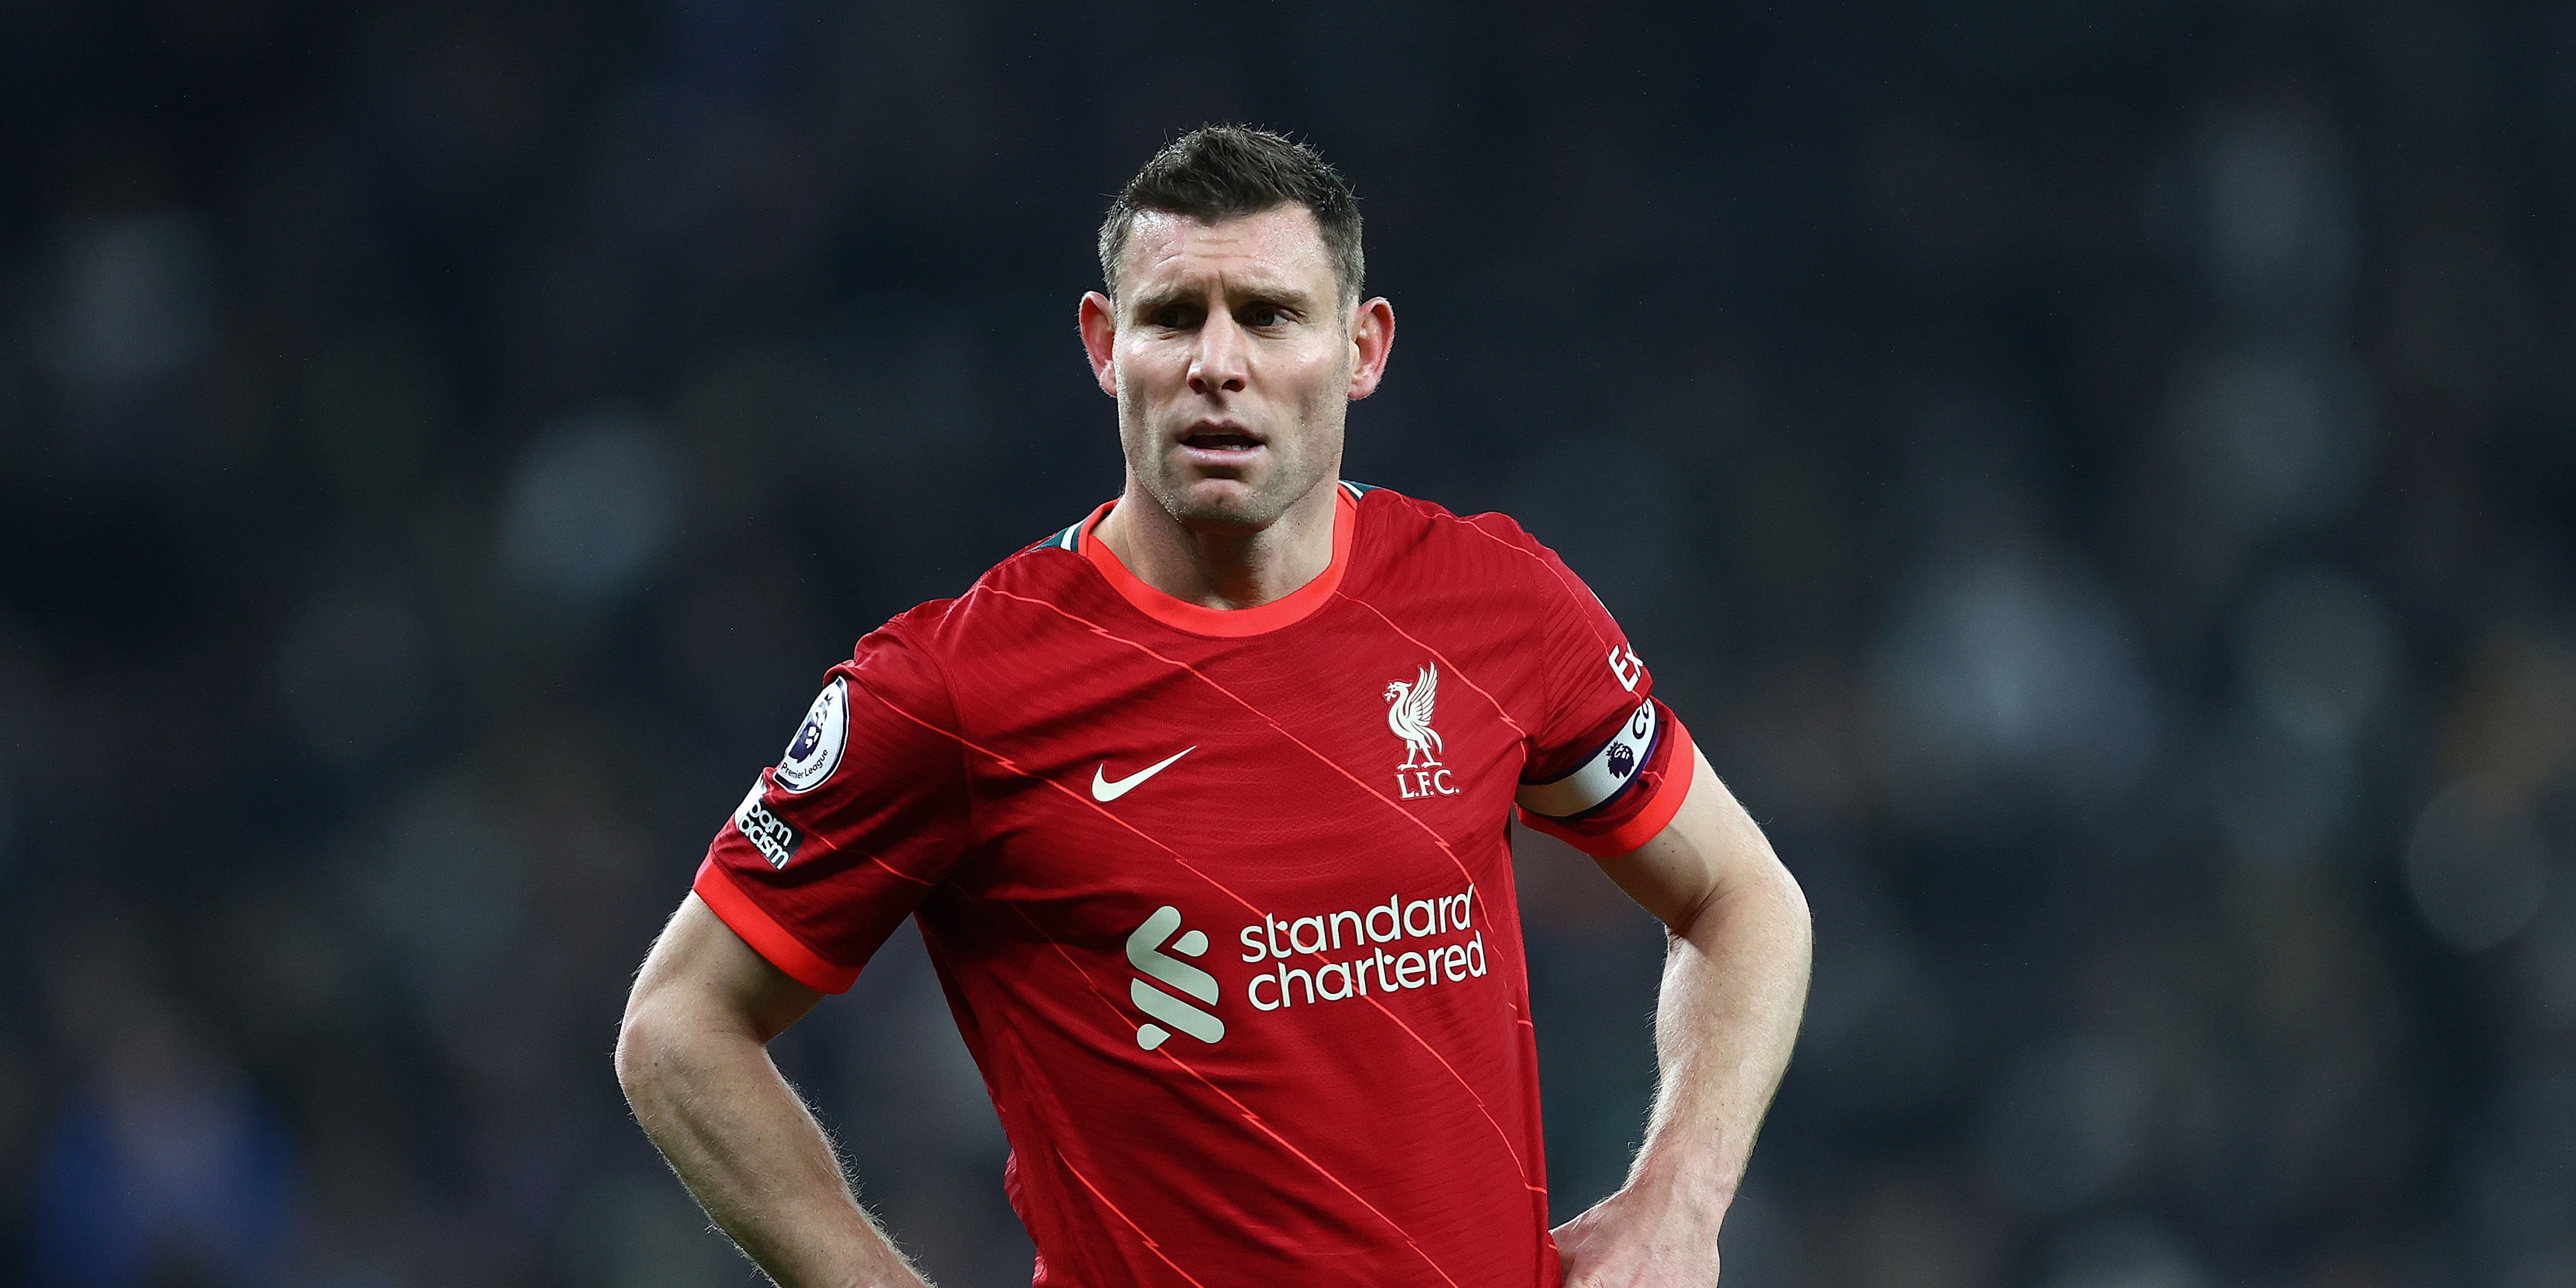 Ryan Babel’s superb response to James Milner’s one-year Liverpool contract extension